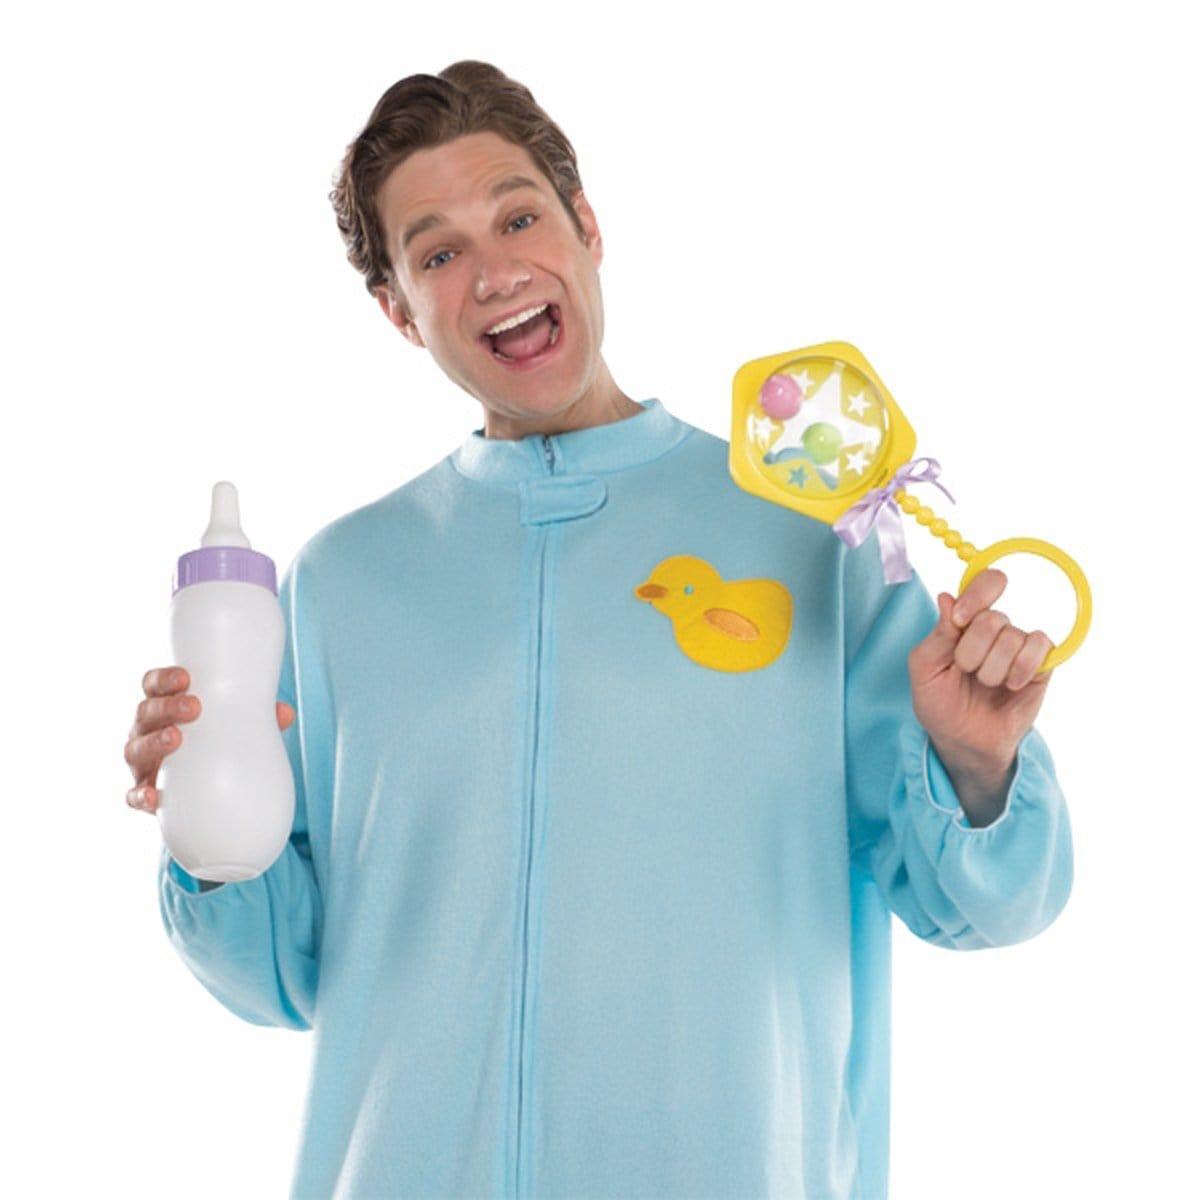 Buy Costume Accessories Giant baby toy kit for adults sold at Party Expert